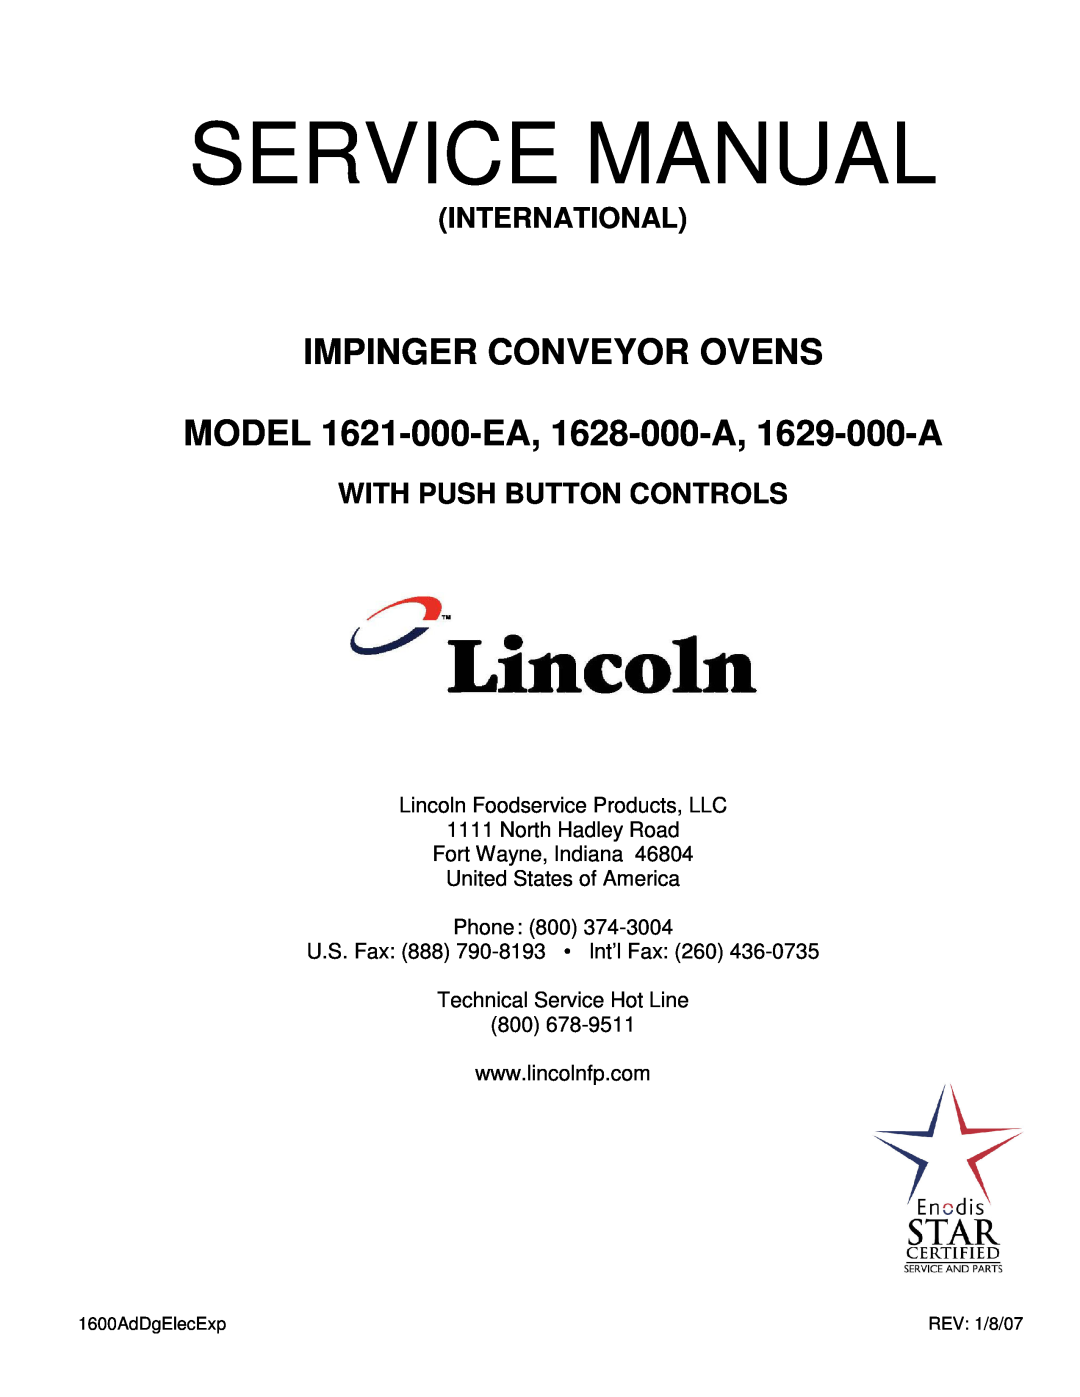 Lincoln 1629-000-A service manual Lincoln Foodservice Products, LLC, North Hadley Road Fort Wayne, Indiana, International 